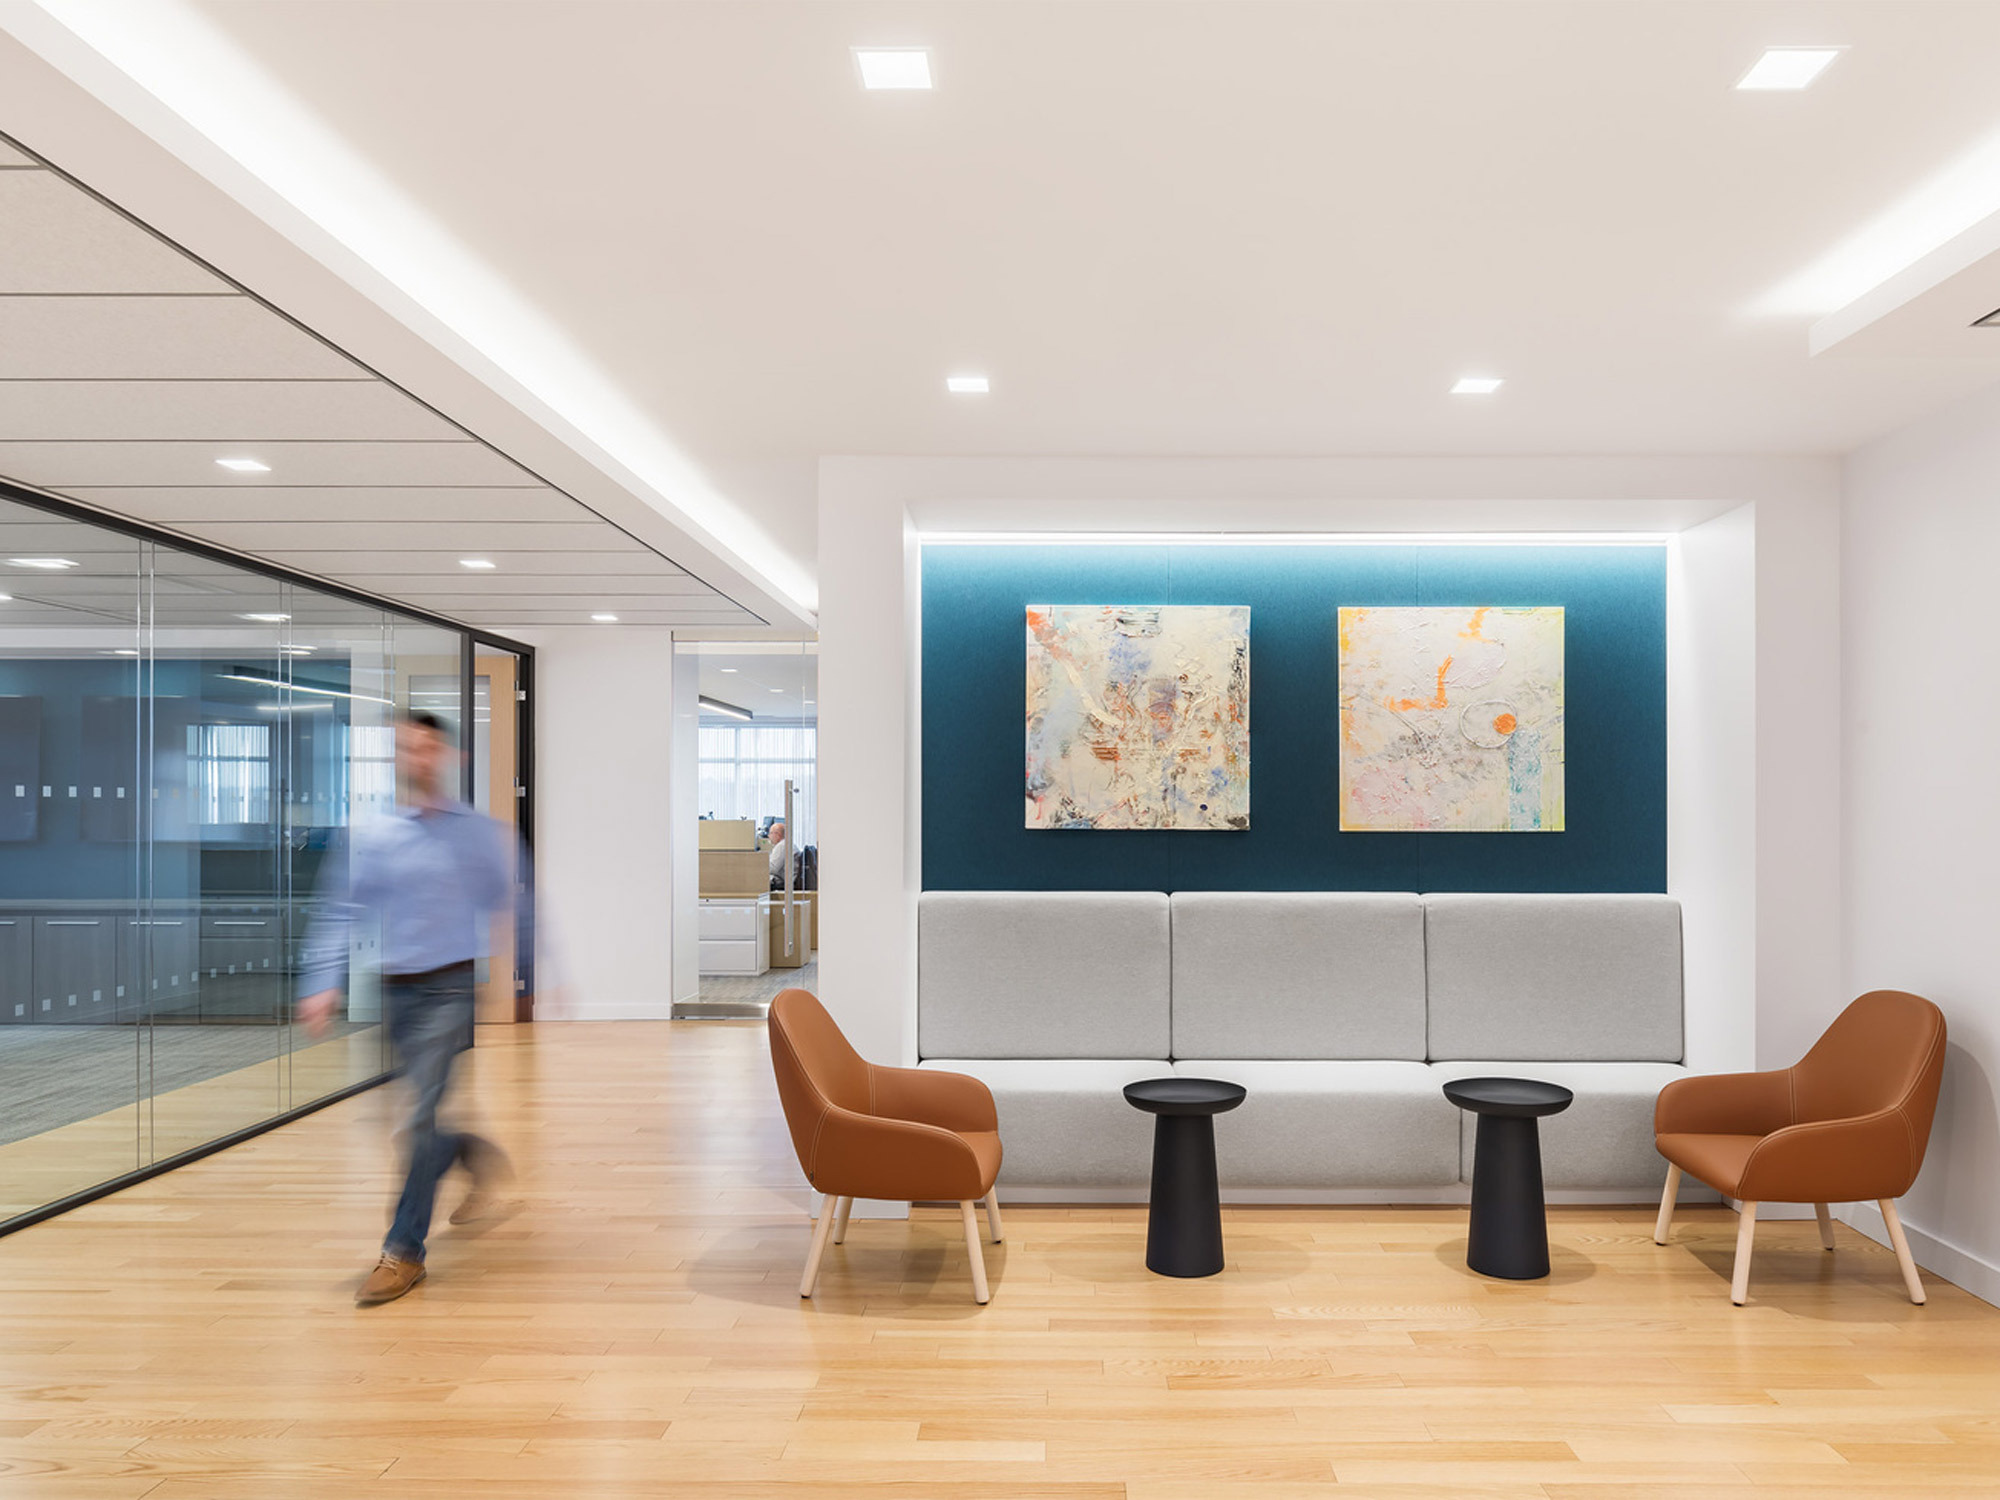 Modern office lobby featuring a neutral color palette with blue accent wall panels, two abstract paintings, sleek grey seating, and warm wooden flooring. Glass partitions offer a glimpse into the adjacent space, highlighting the open-concept design, while recessed lighting provides ambient illumination.